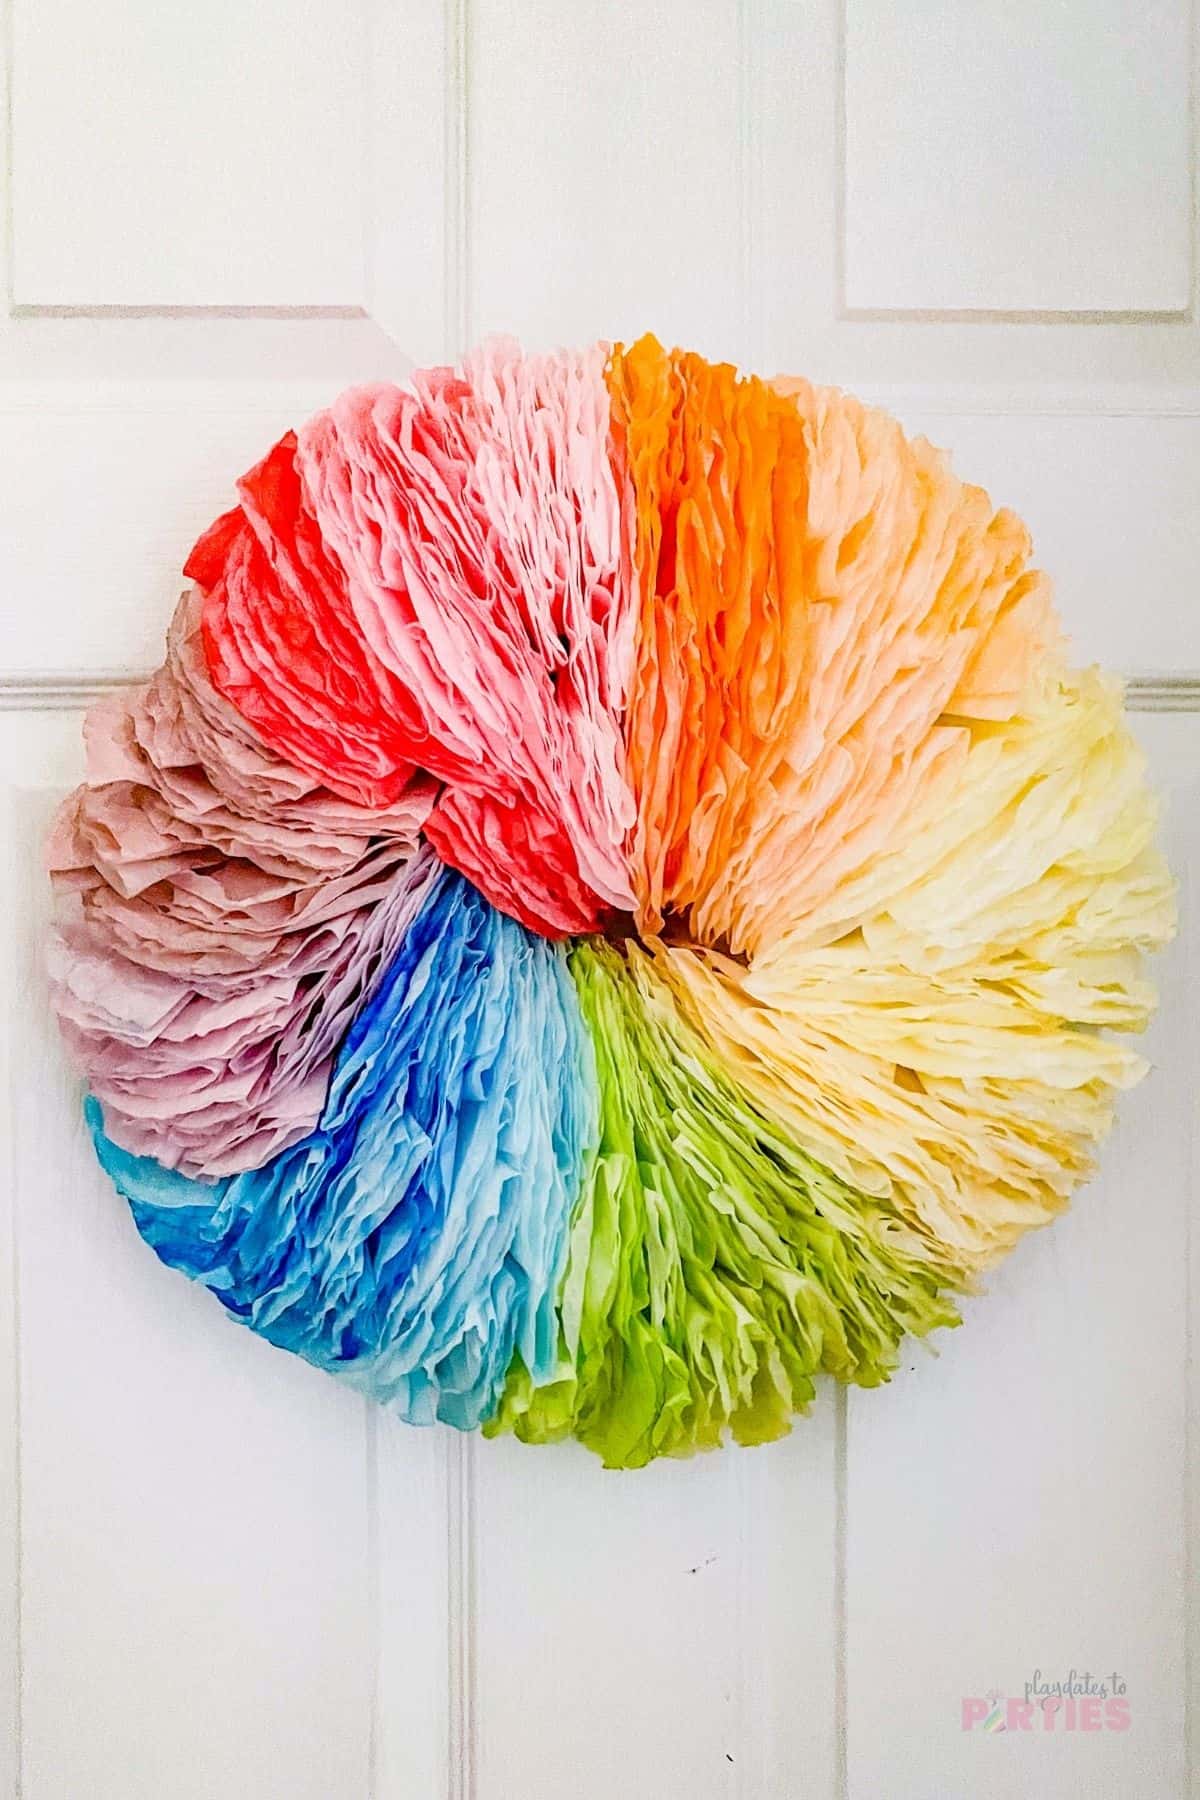 A fluffy rainbow wreath made from coffee filters hangs on an interior door.